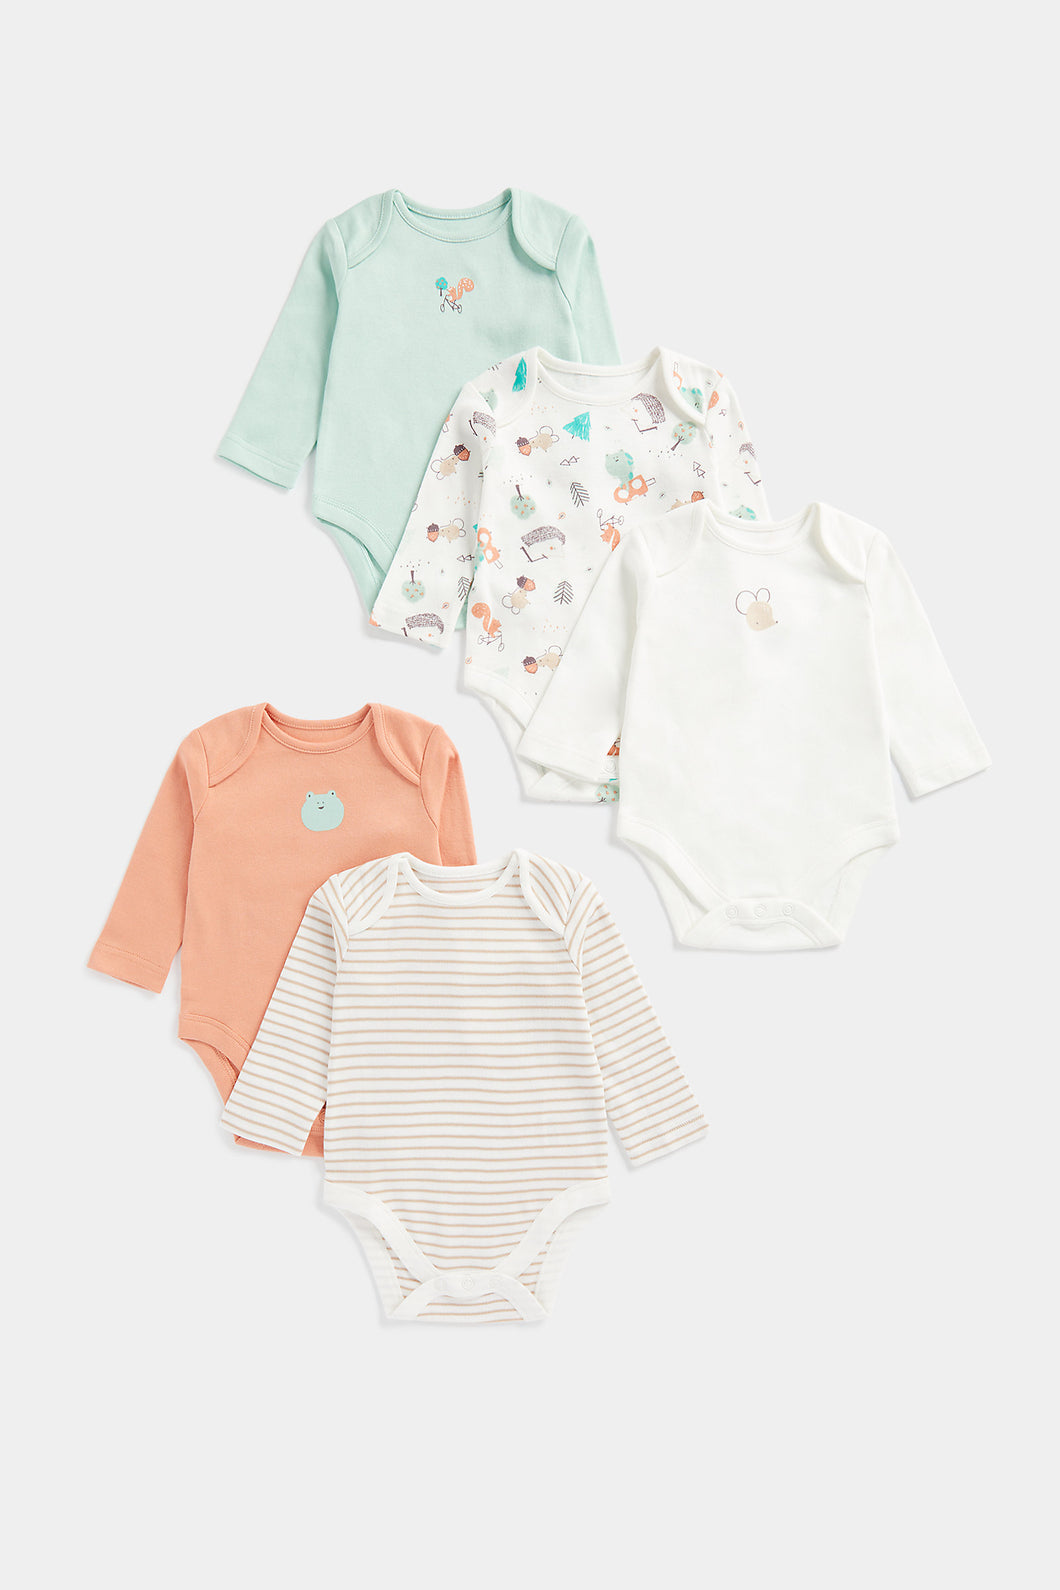 Mothercare Long-Sleeved Baby Bodysuits - 5 Pack